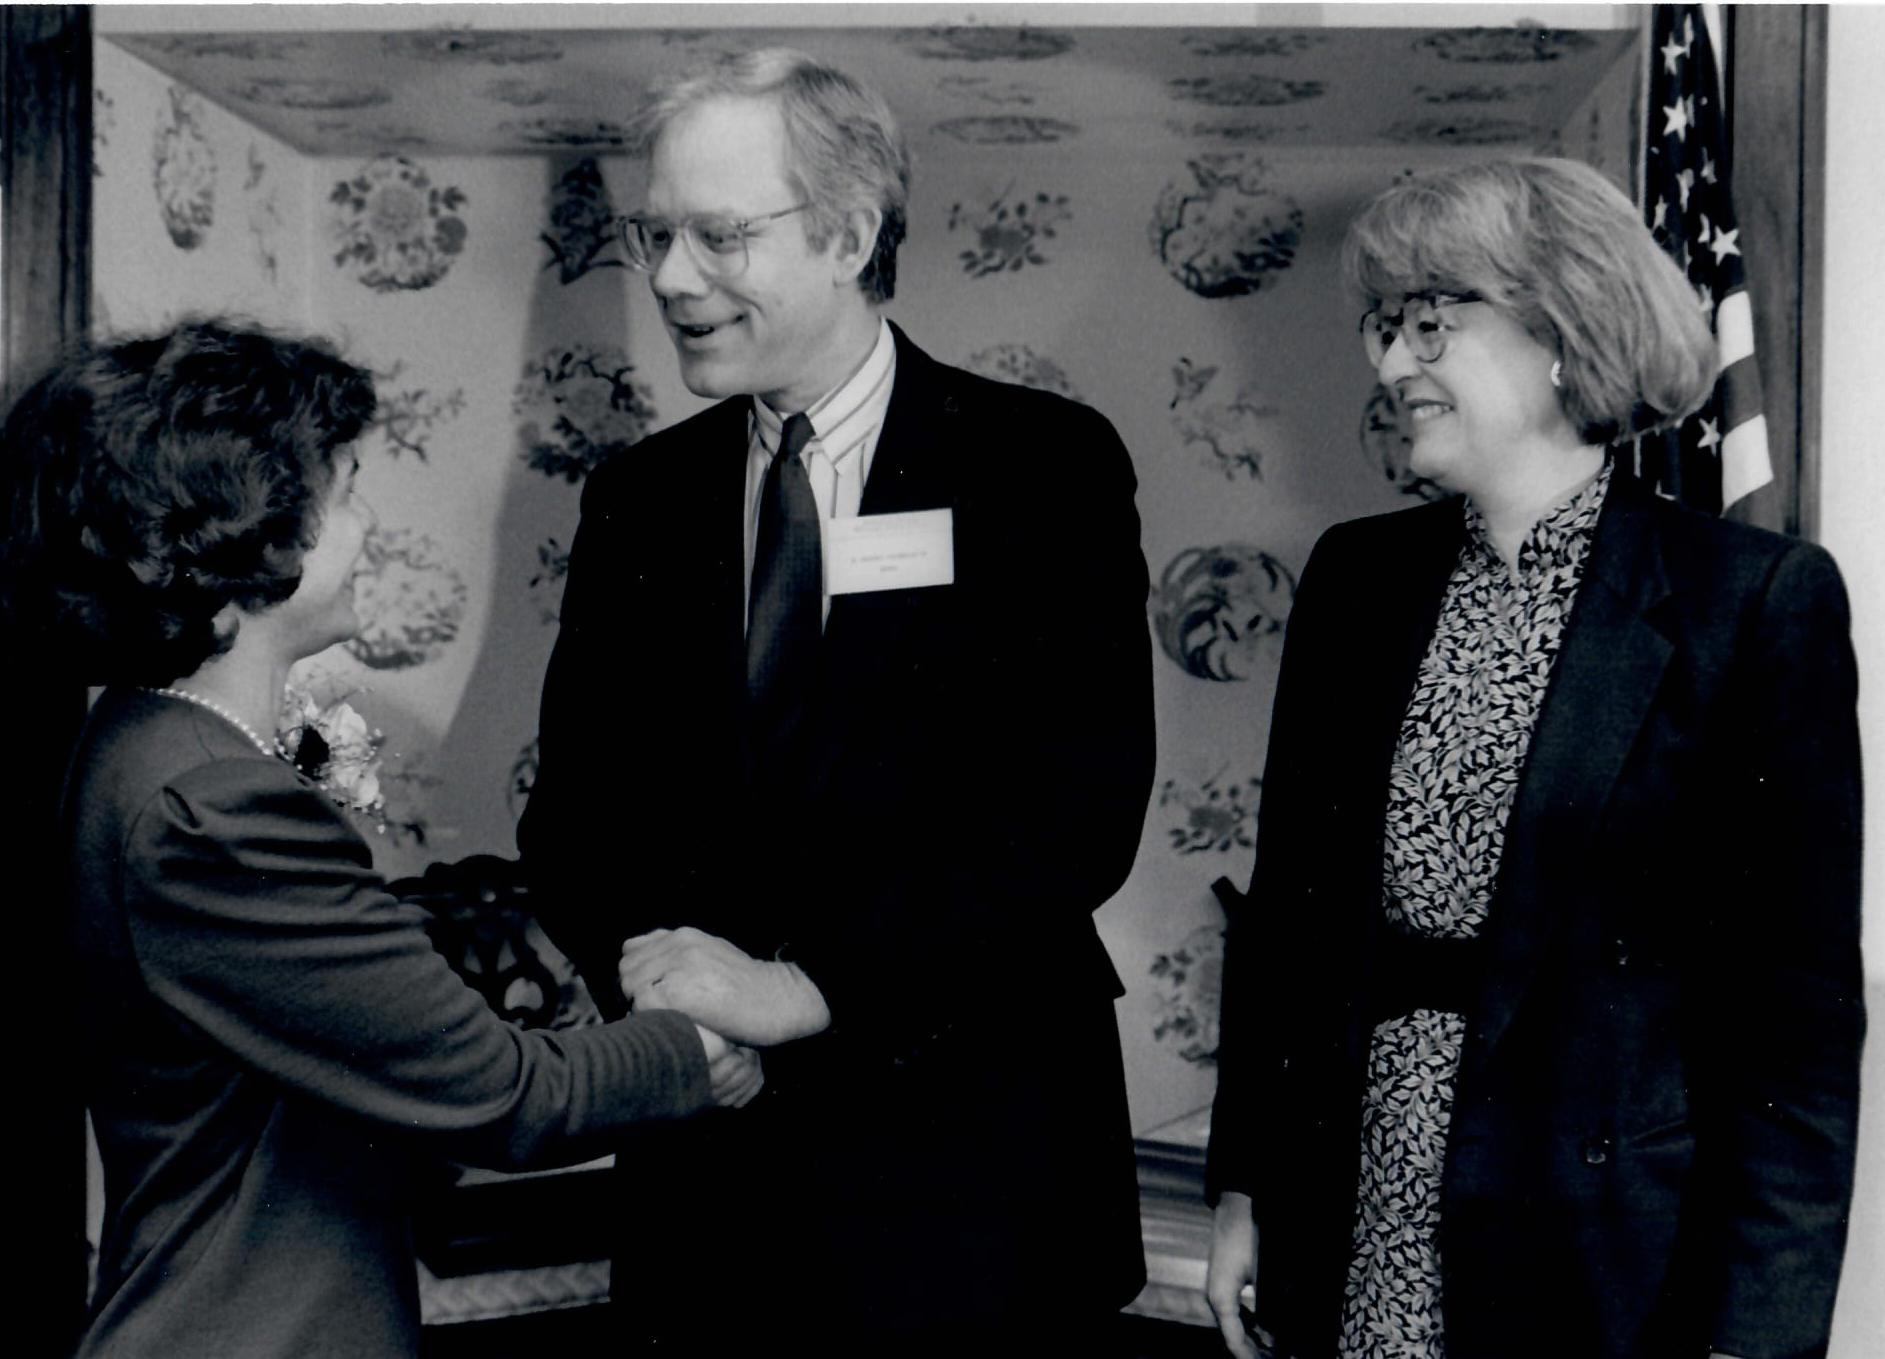  CB Receiving APWA's Highest Award for Exemplary Public Service Leadership from Sid Johnson and HHS Deputy Secretary Constance Horner (1991) 